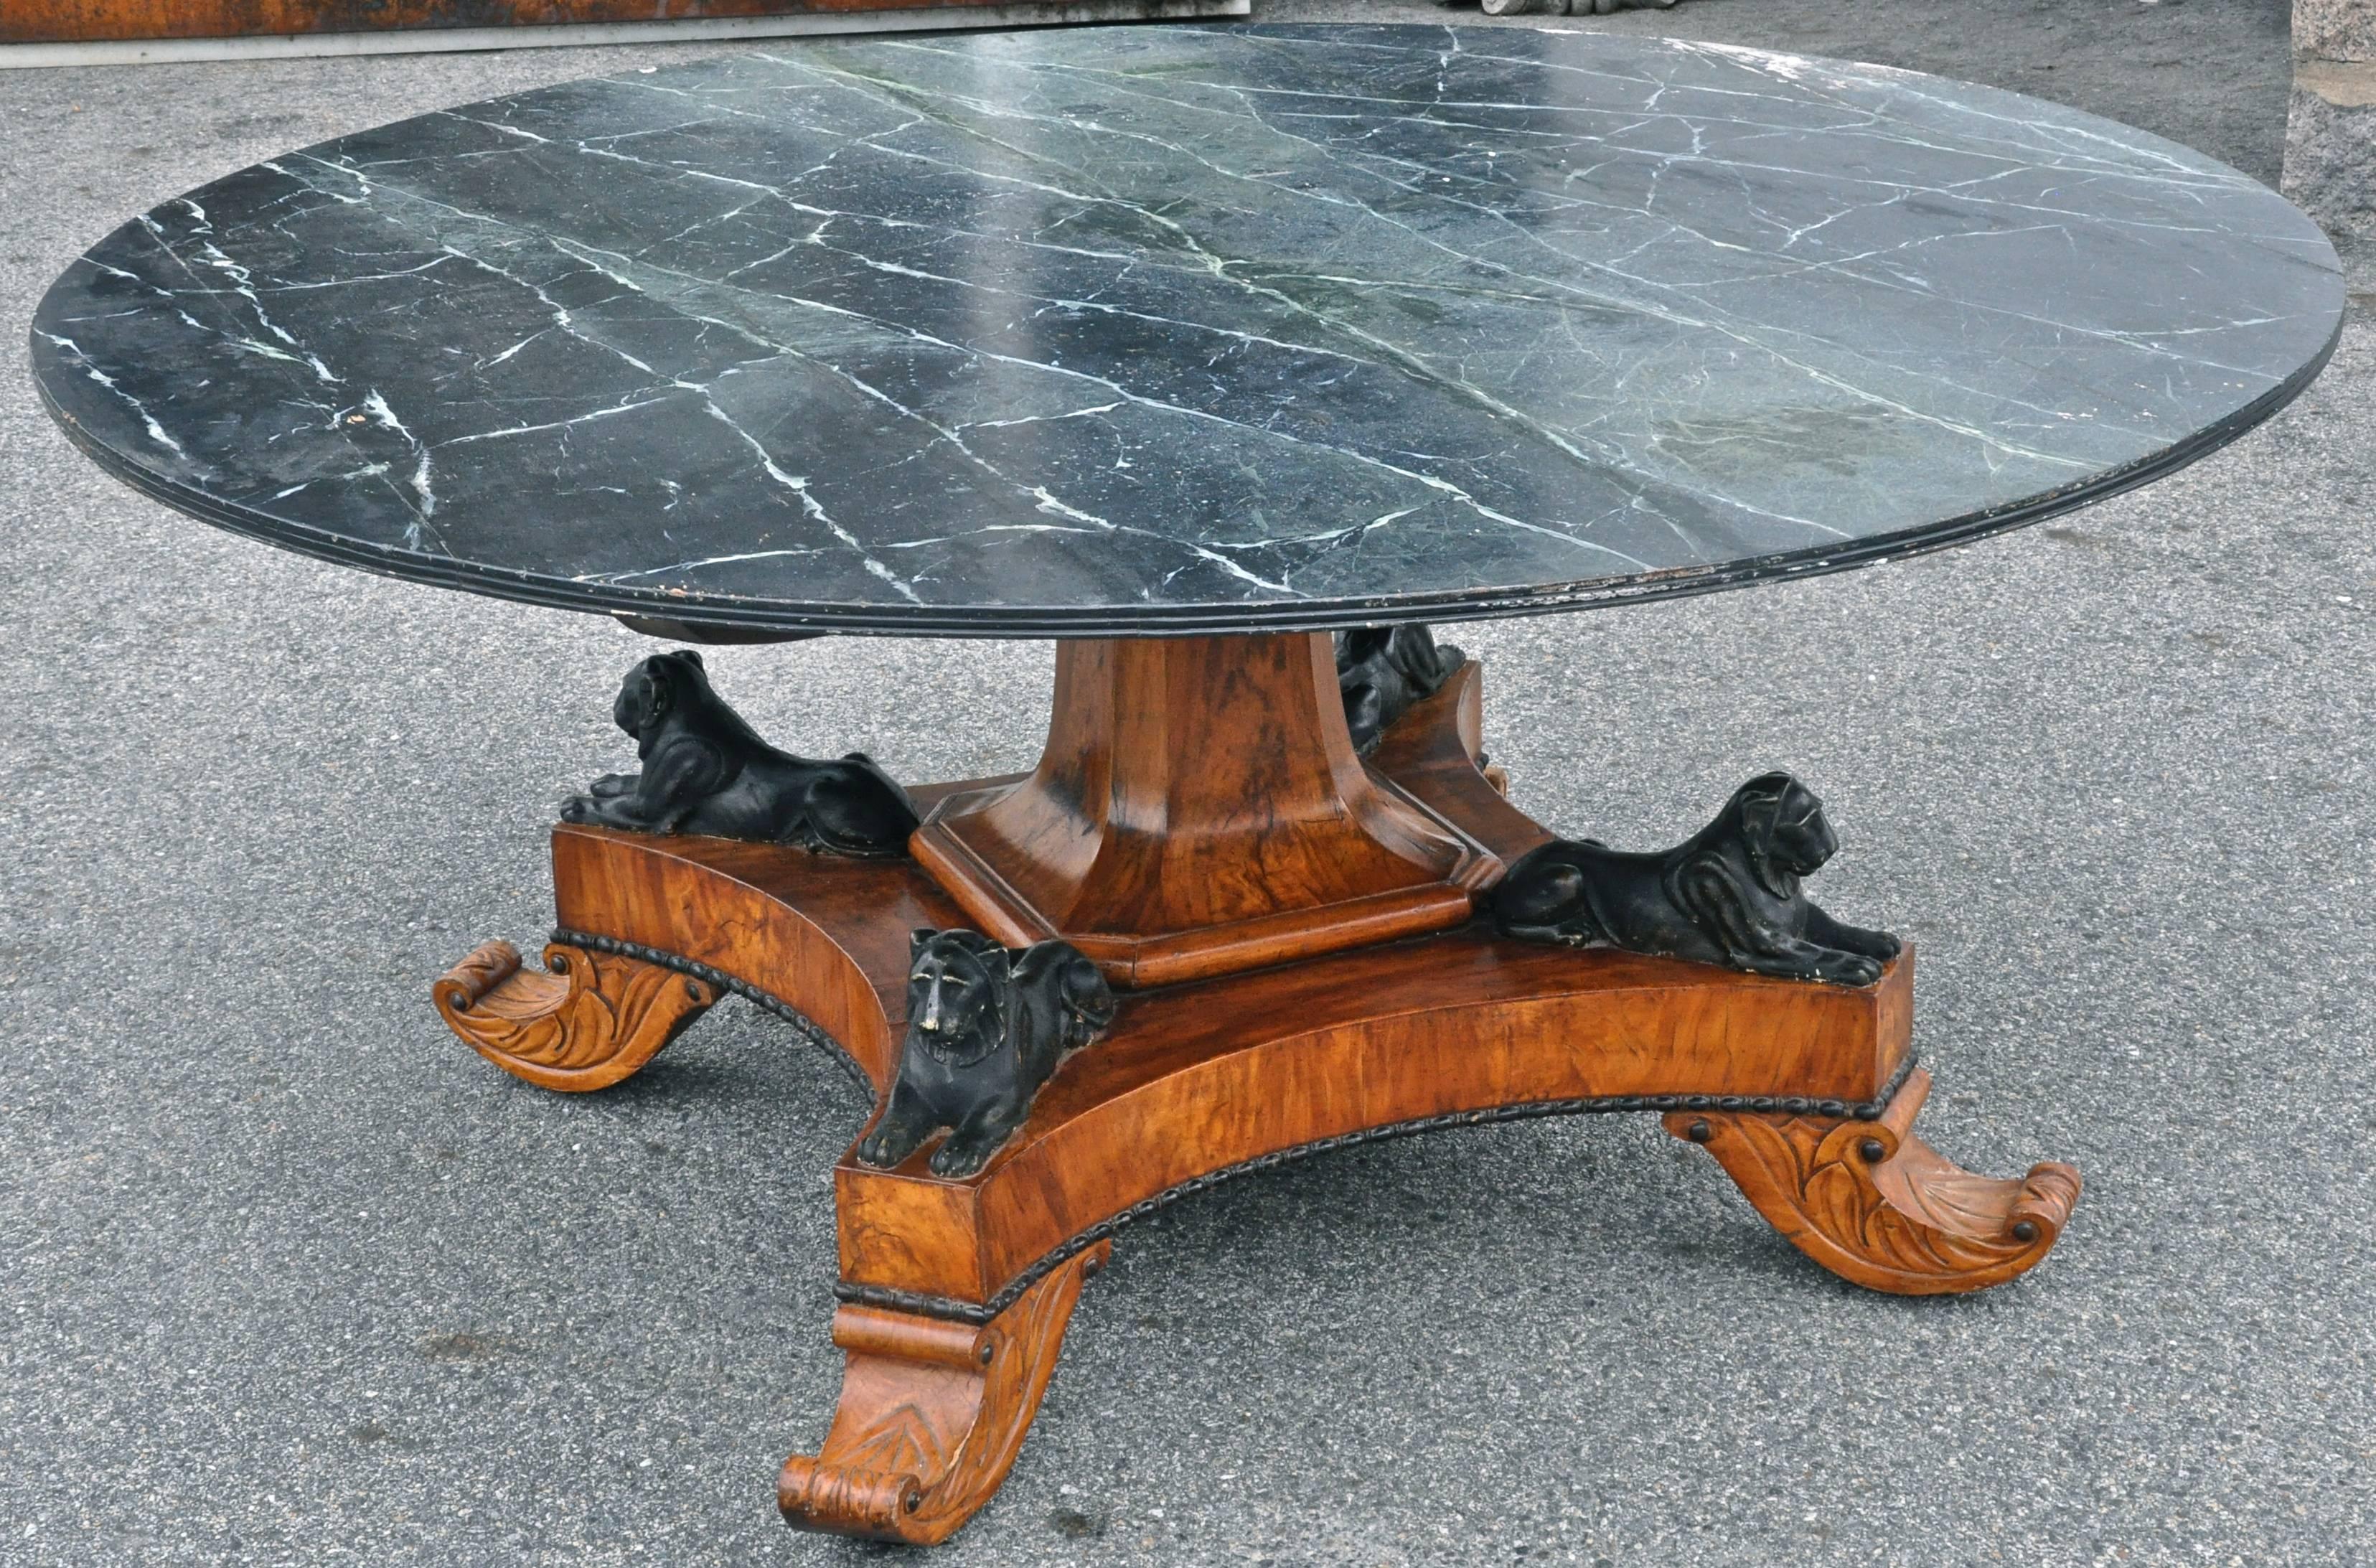 Neoclassical walnut round dining table in style of Thomas Hope.

Beautifully figured crotch walnut pedestal with four Egyptian recumbent lions bearing strong similarity to designs by Thomas Hope.
Large tilting top in later faux paint, though by